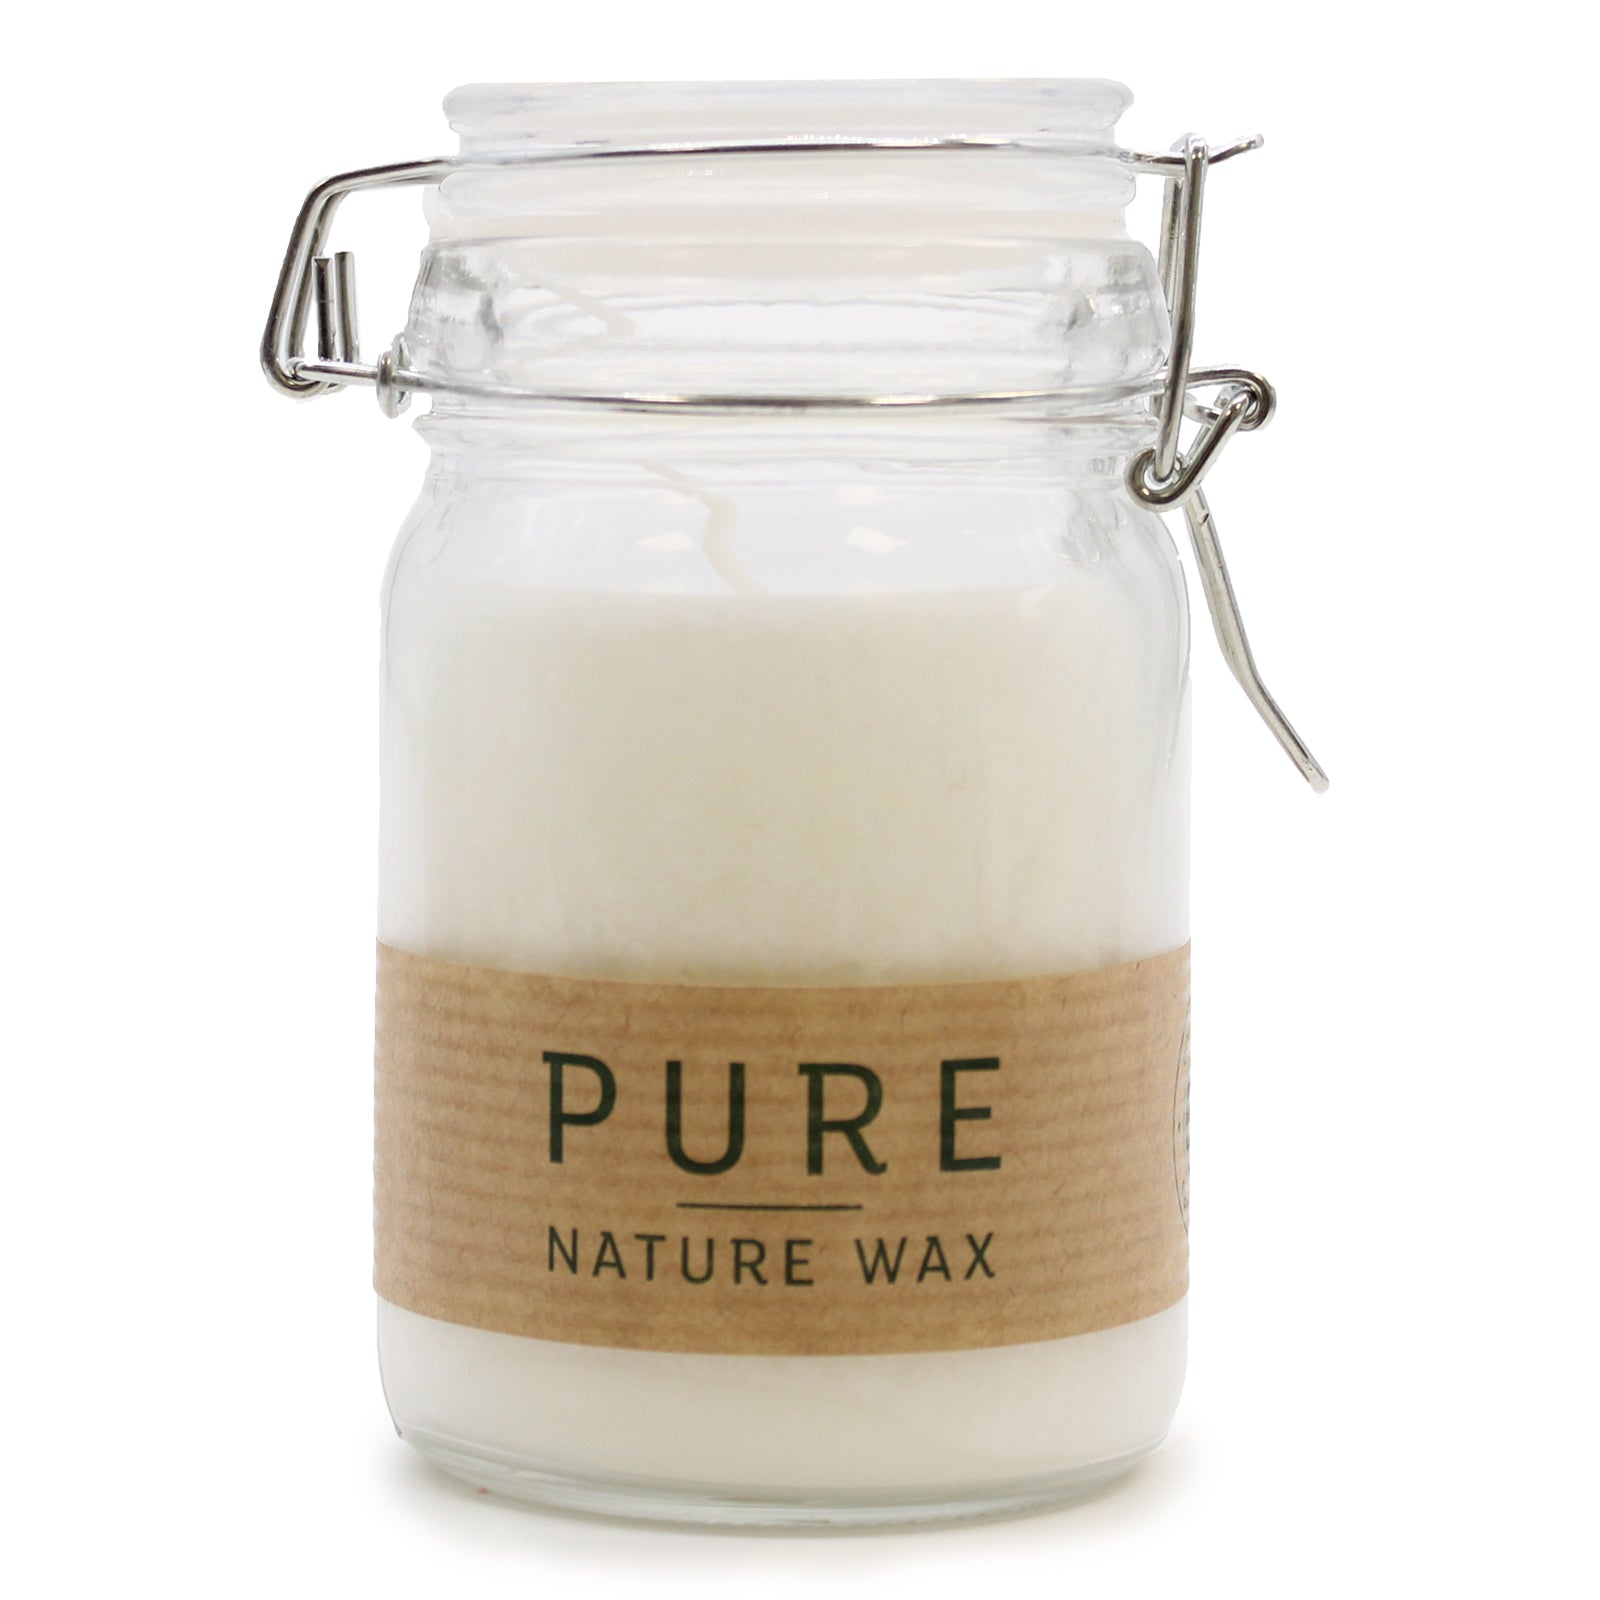 Pure white candle - Kaftans direct